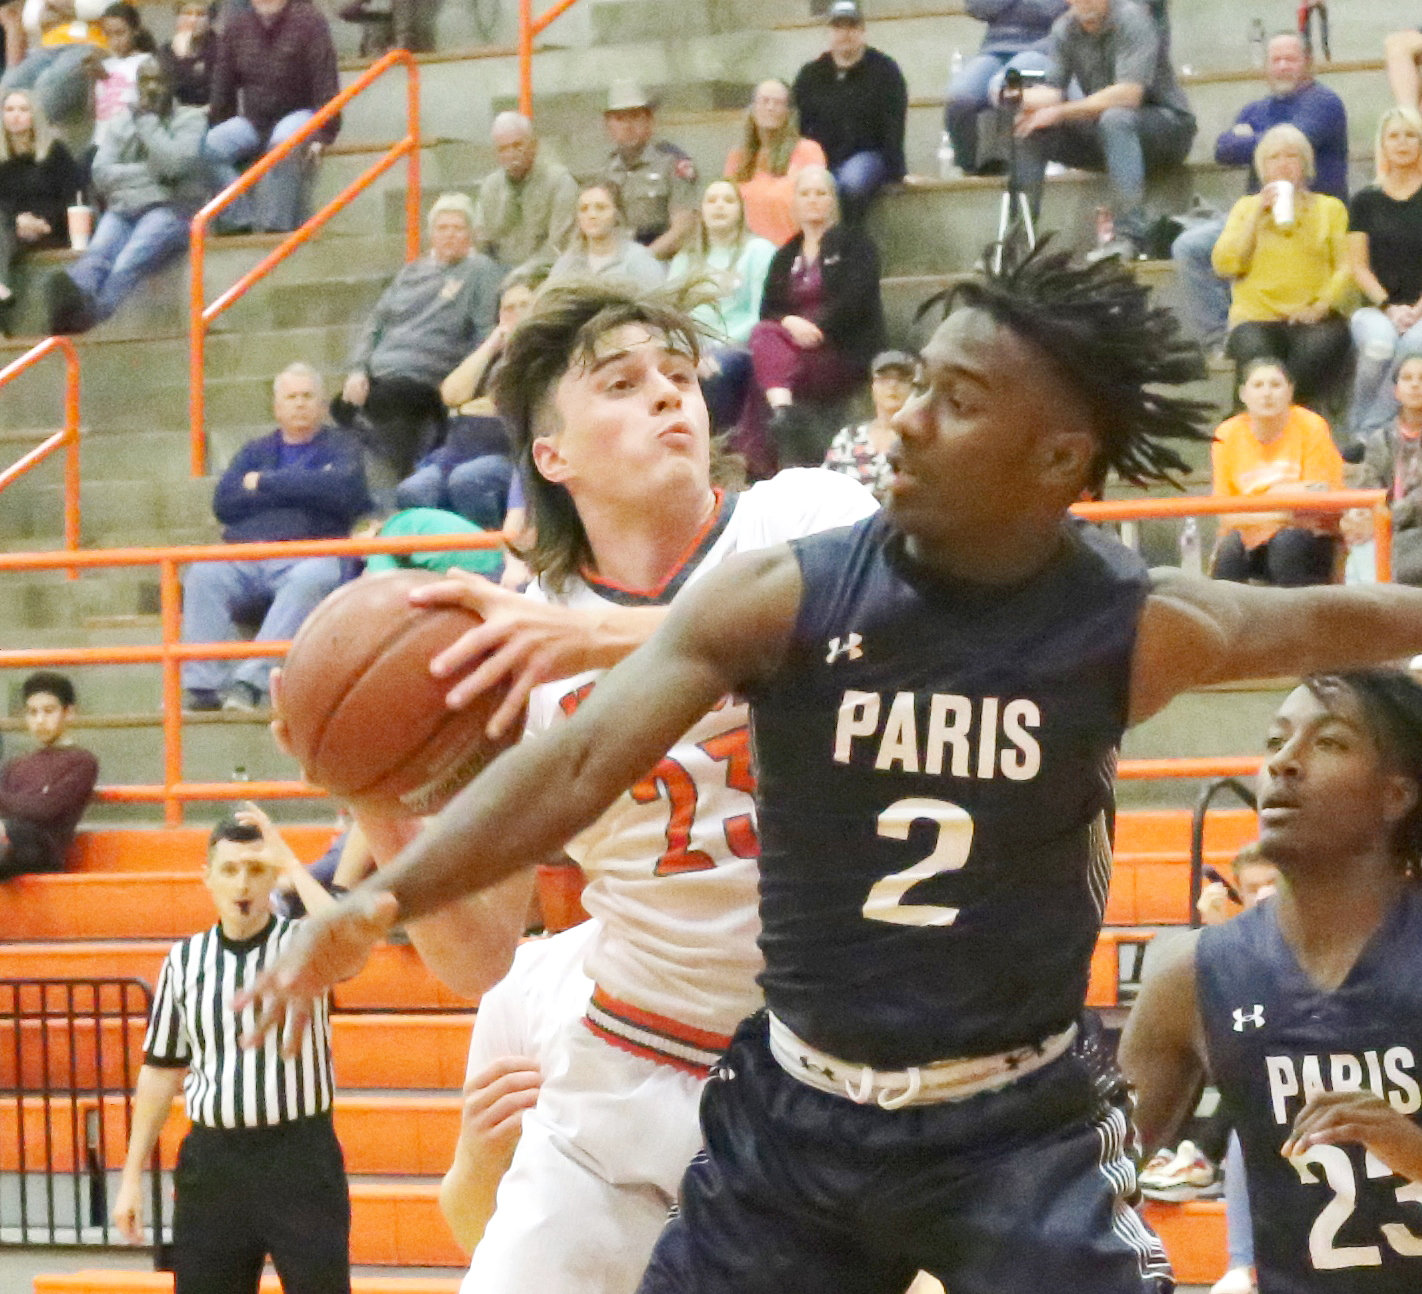 Senior Yellowjacket Wiley Franks pulls down a rebound in a crowd against Paris. (Monitor photo by John Arbter)